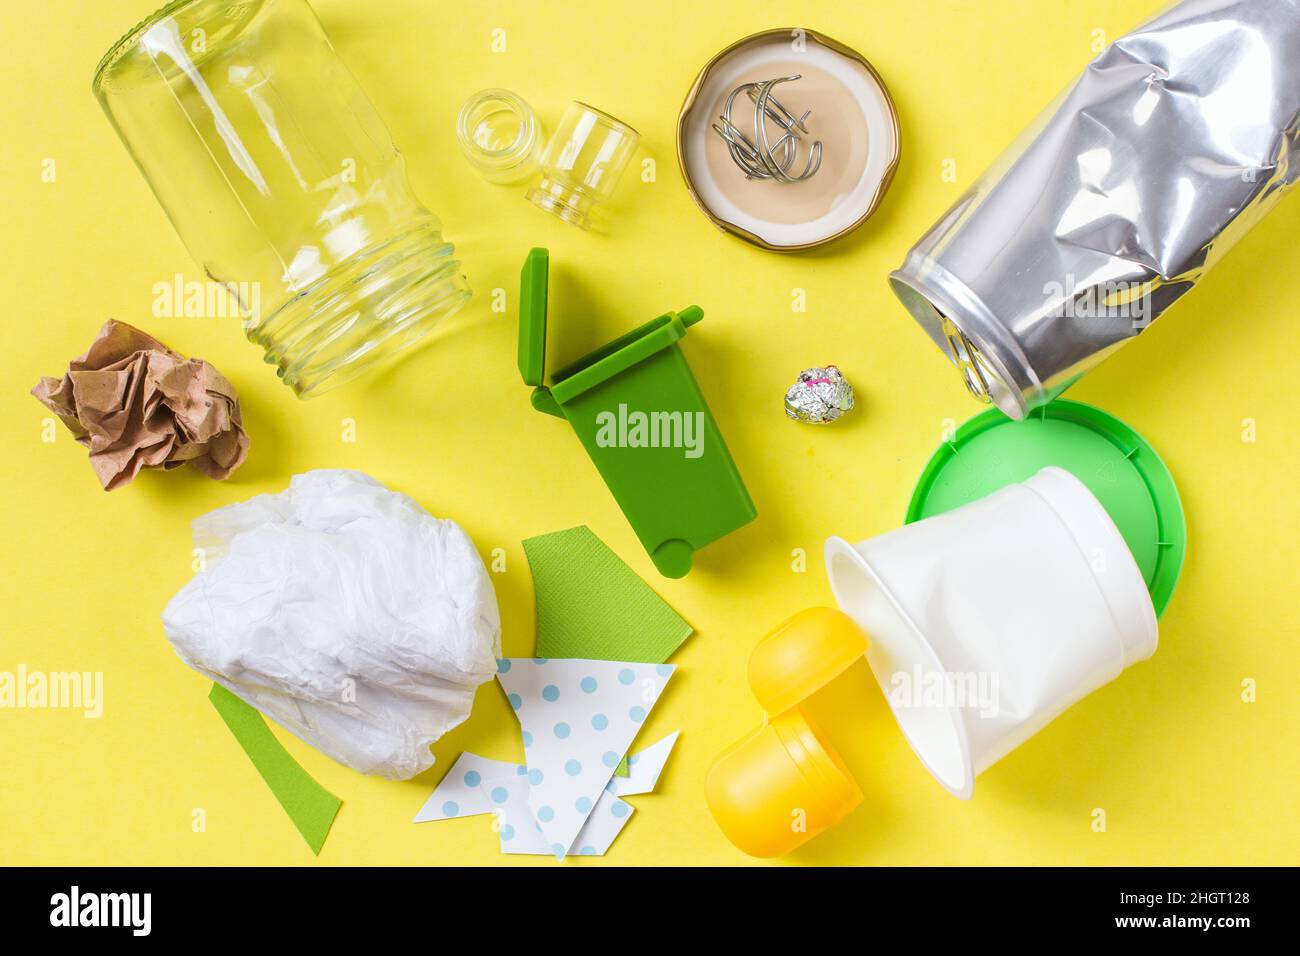 Clean trash to recycle in small bin metal, plastic paper and glass. Recycling concept on yellow. Stock Photo